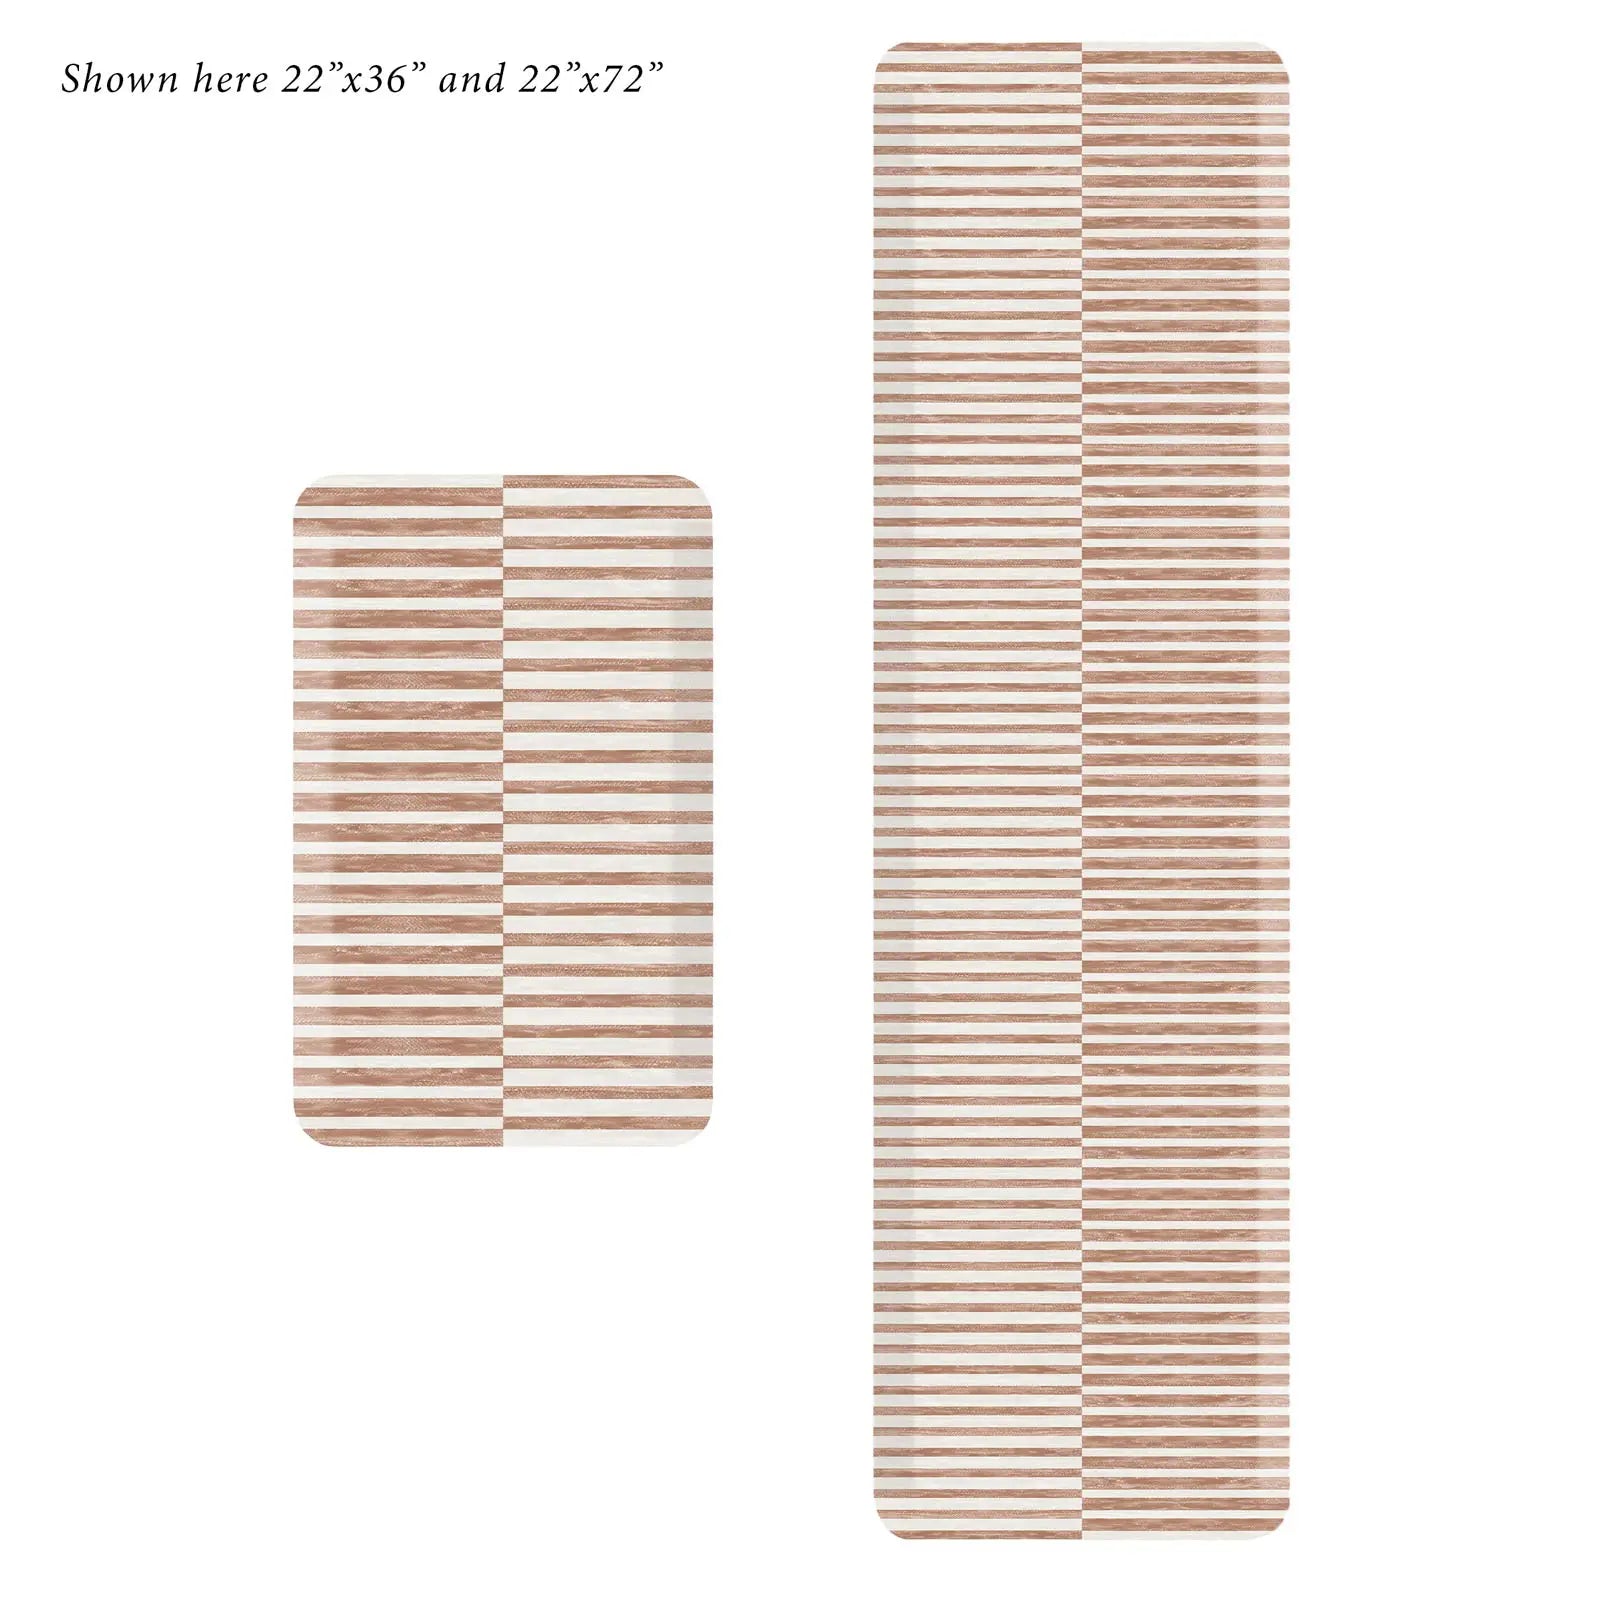 Reese terracotta brown and white striped standing mat shown in sizes 22x36 and 22x7272